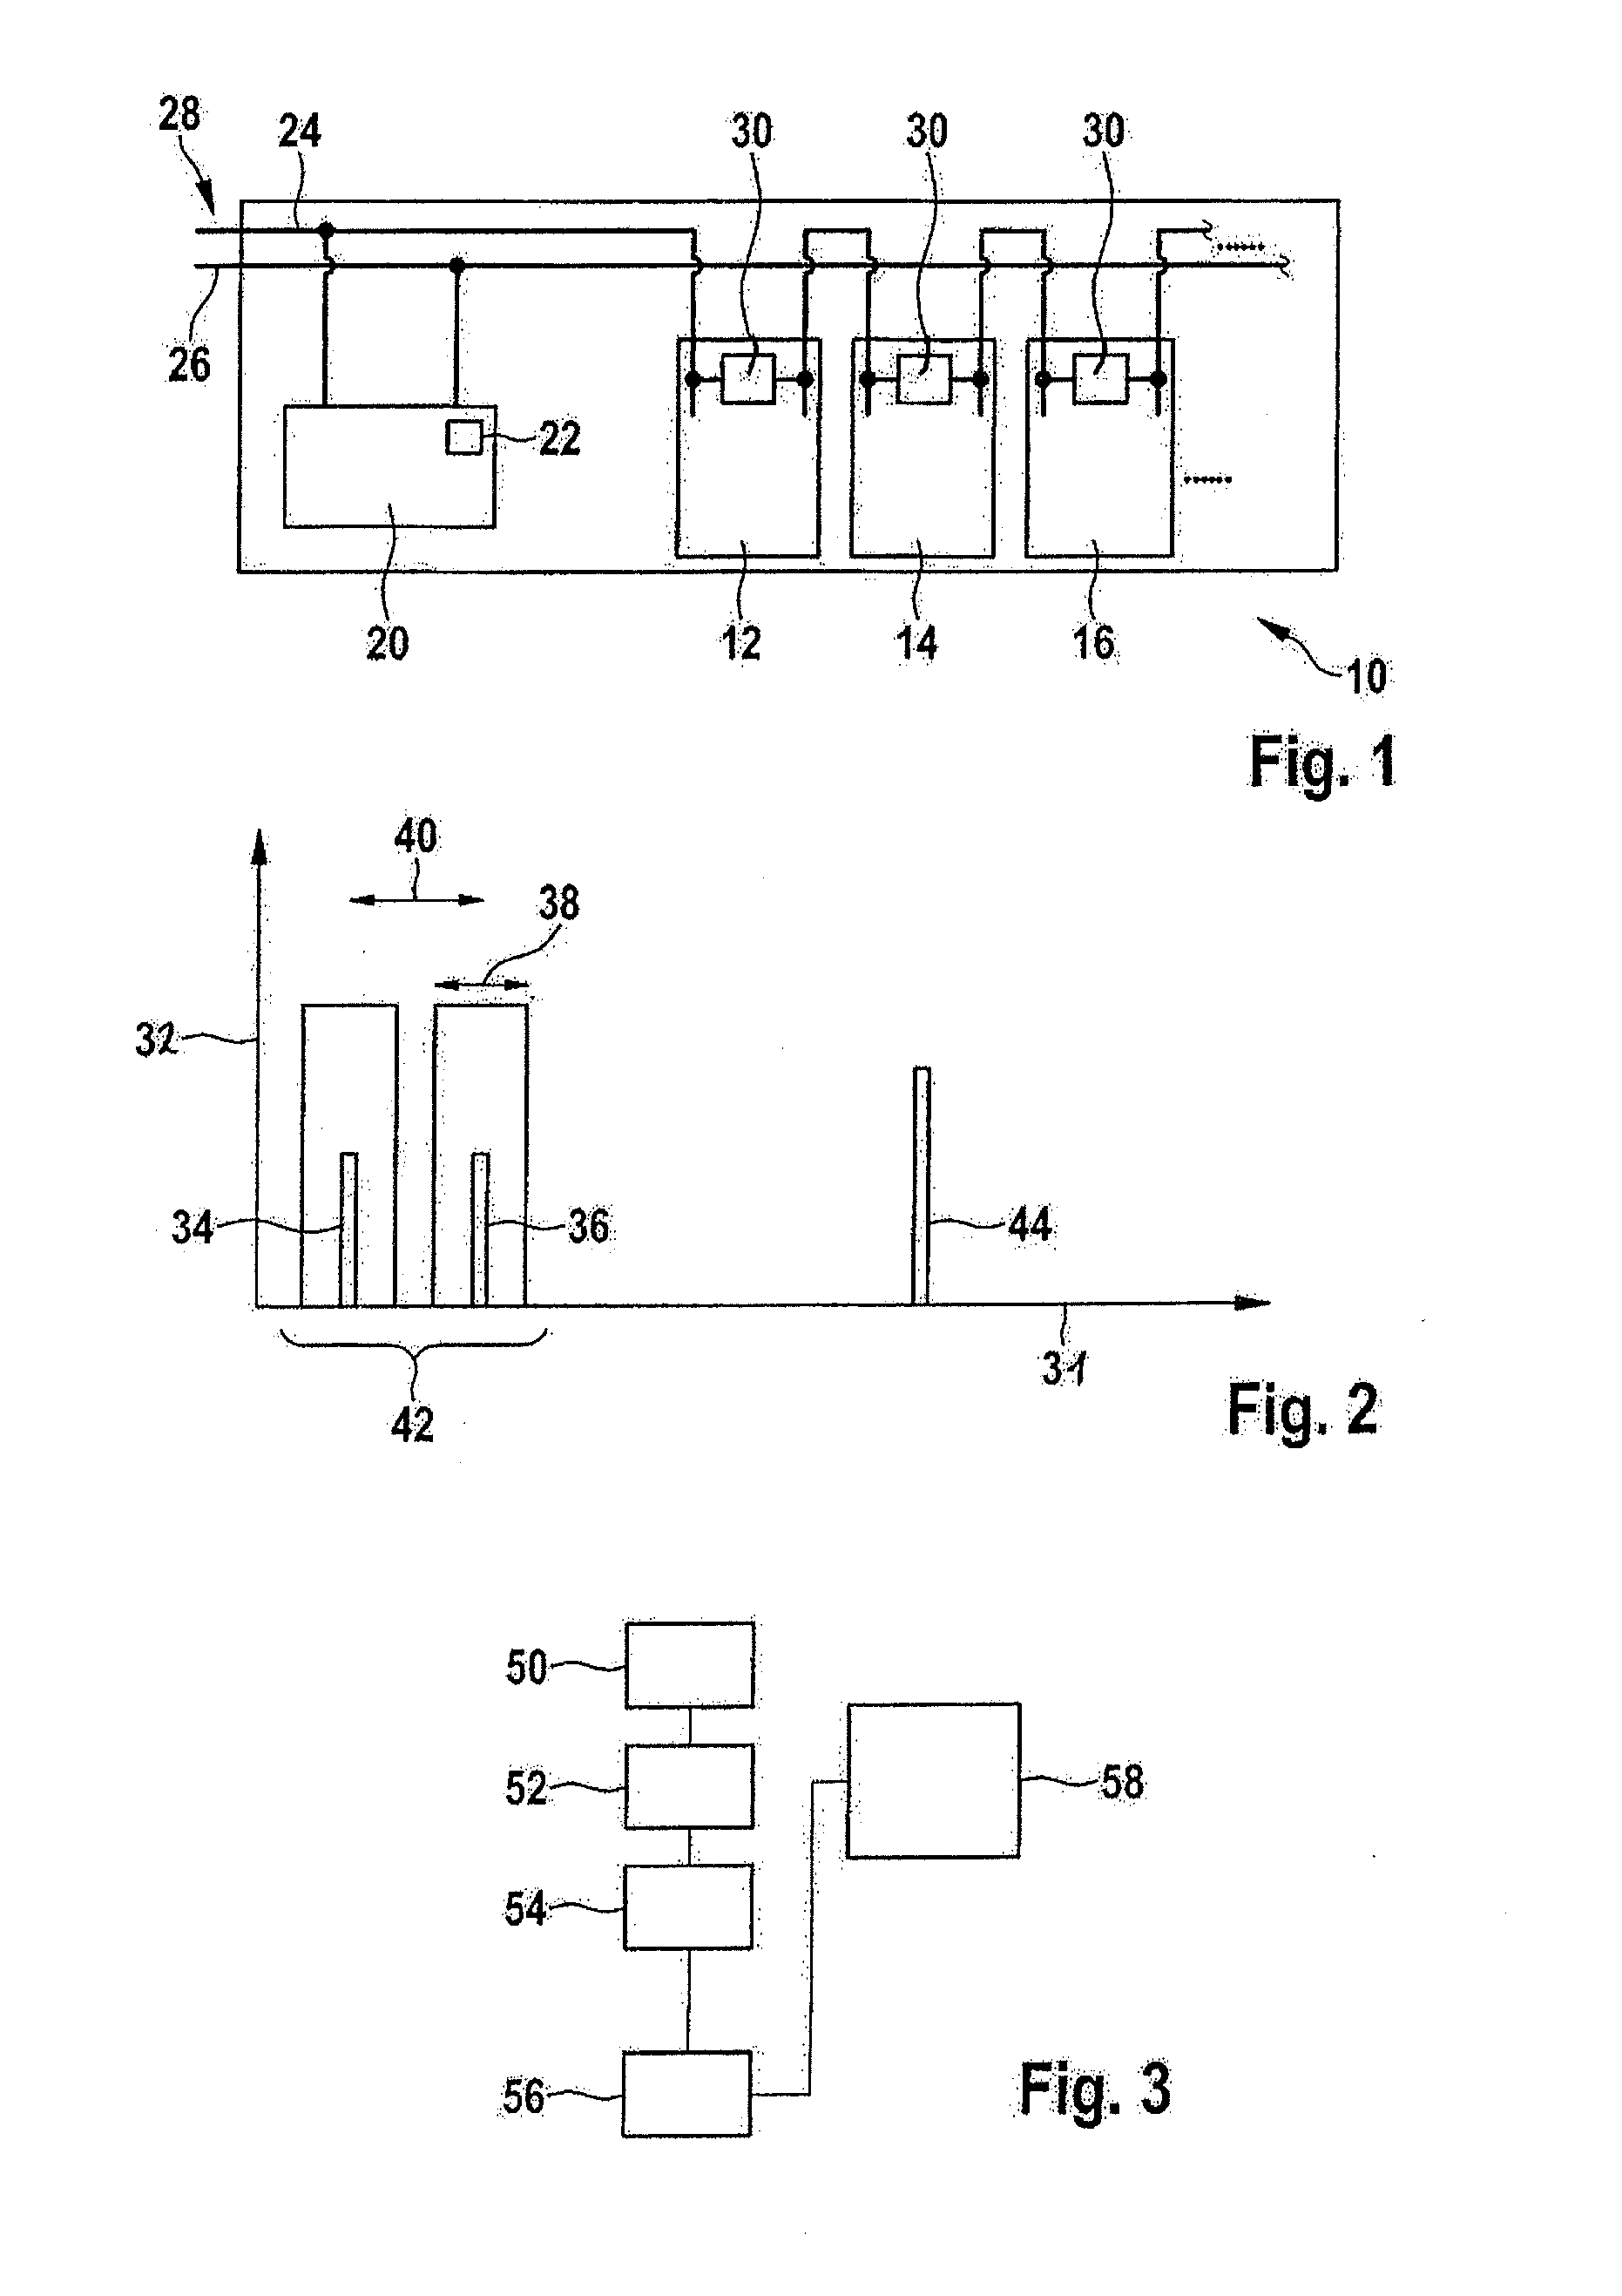 Method for Monitoring a Battery